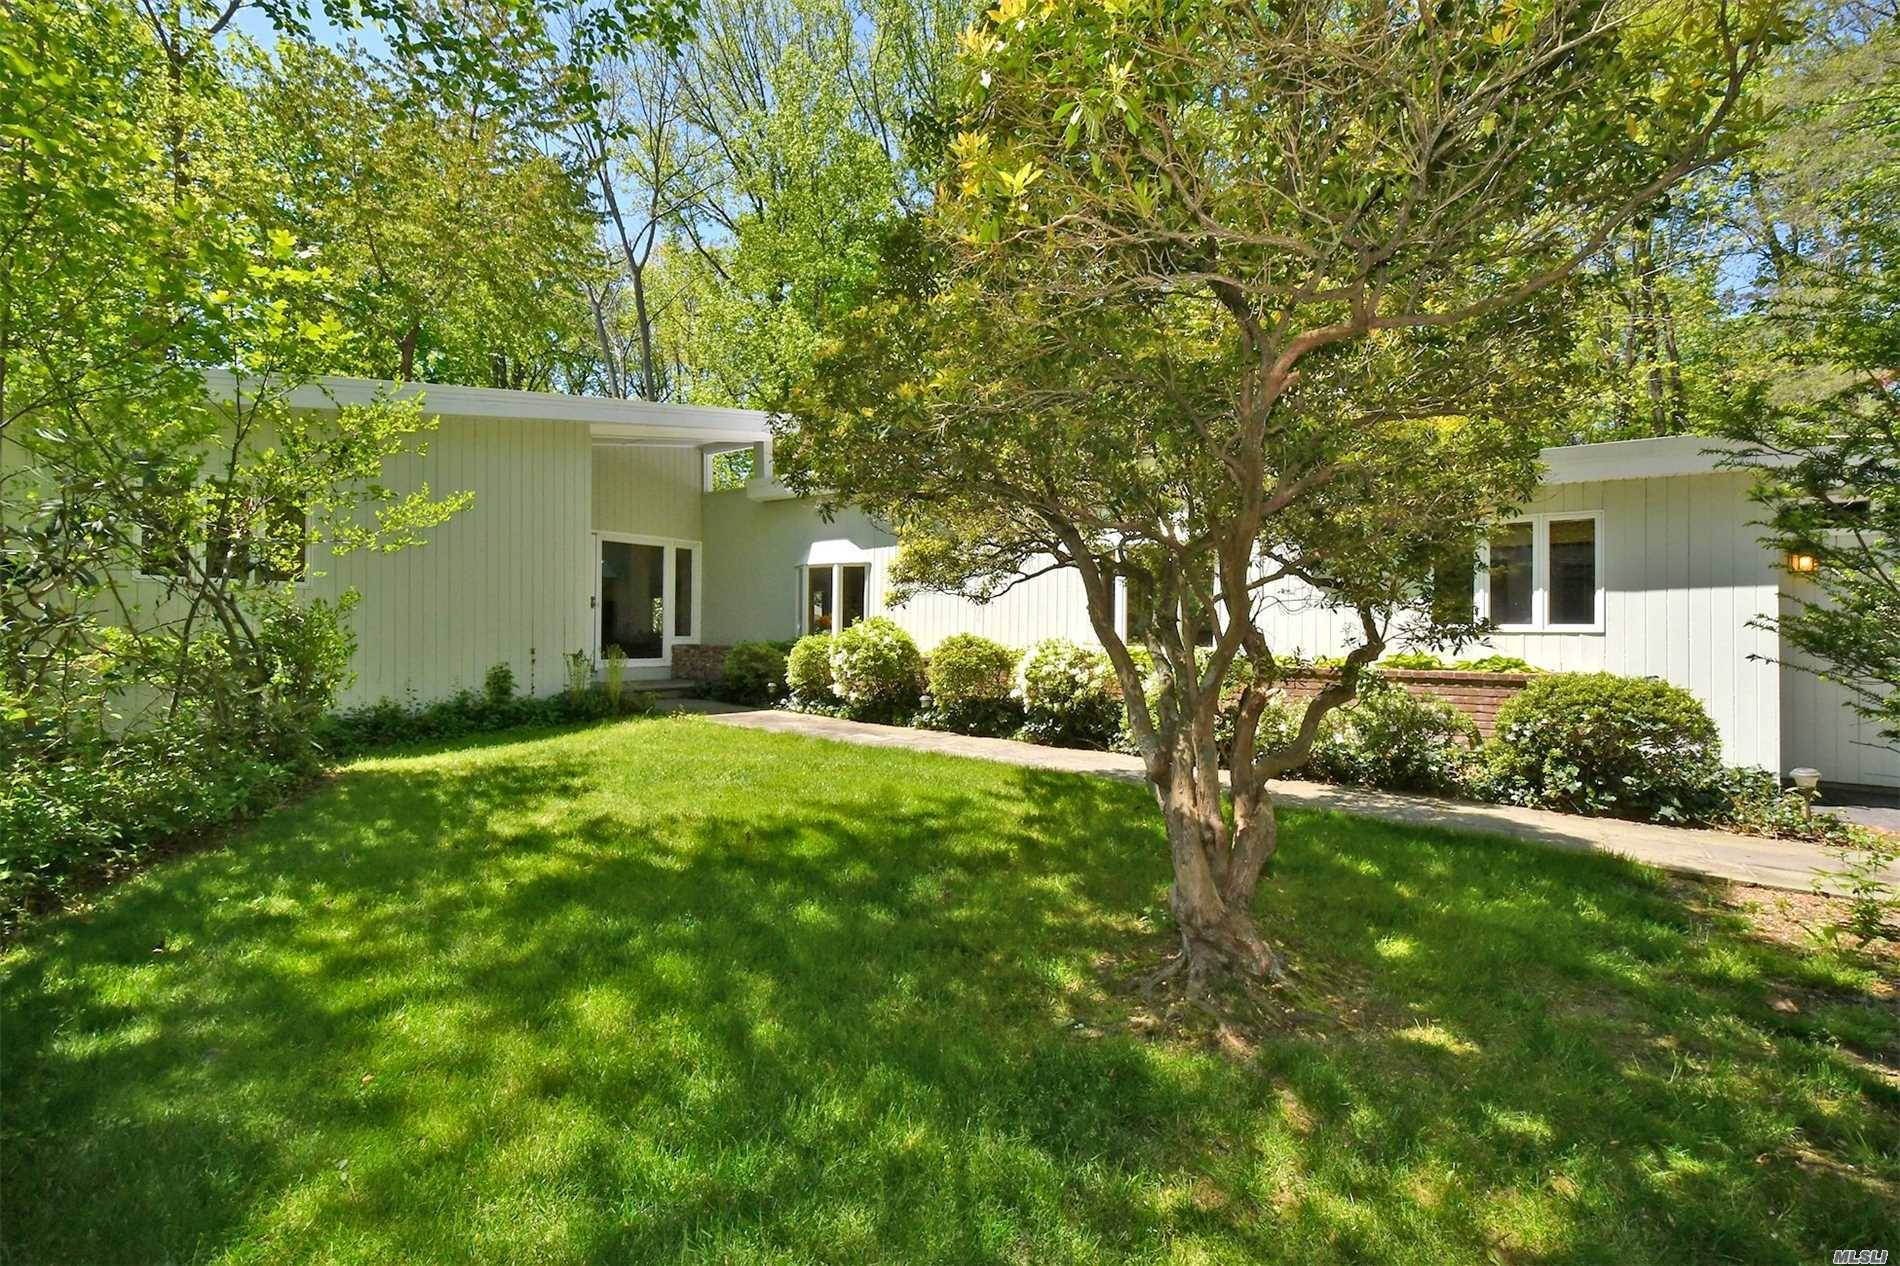 Nature & Privacy Surround This Quintessential Lloyd Harbor Mid-Century Modern 3/4 Bed Exp Ranch On Pvt Rd Leading To Beach W/Mooring Rights.